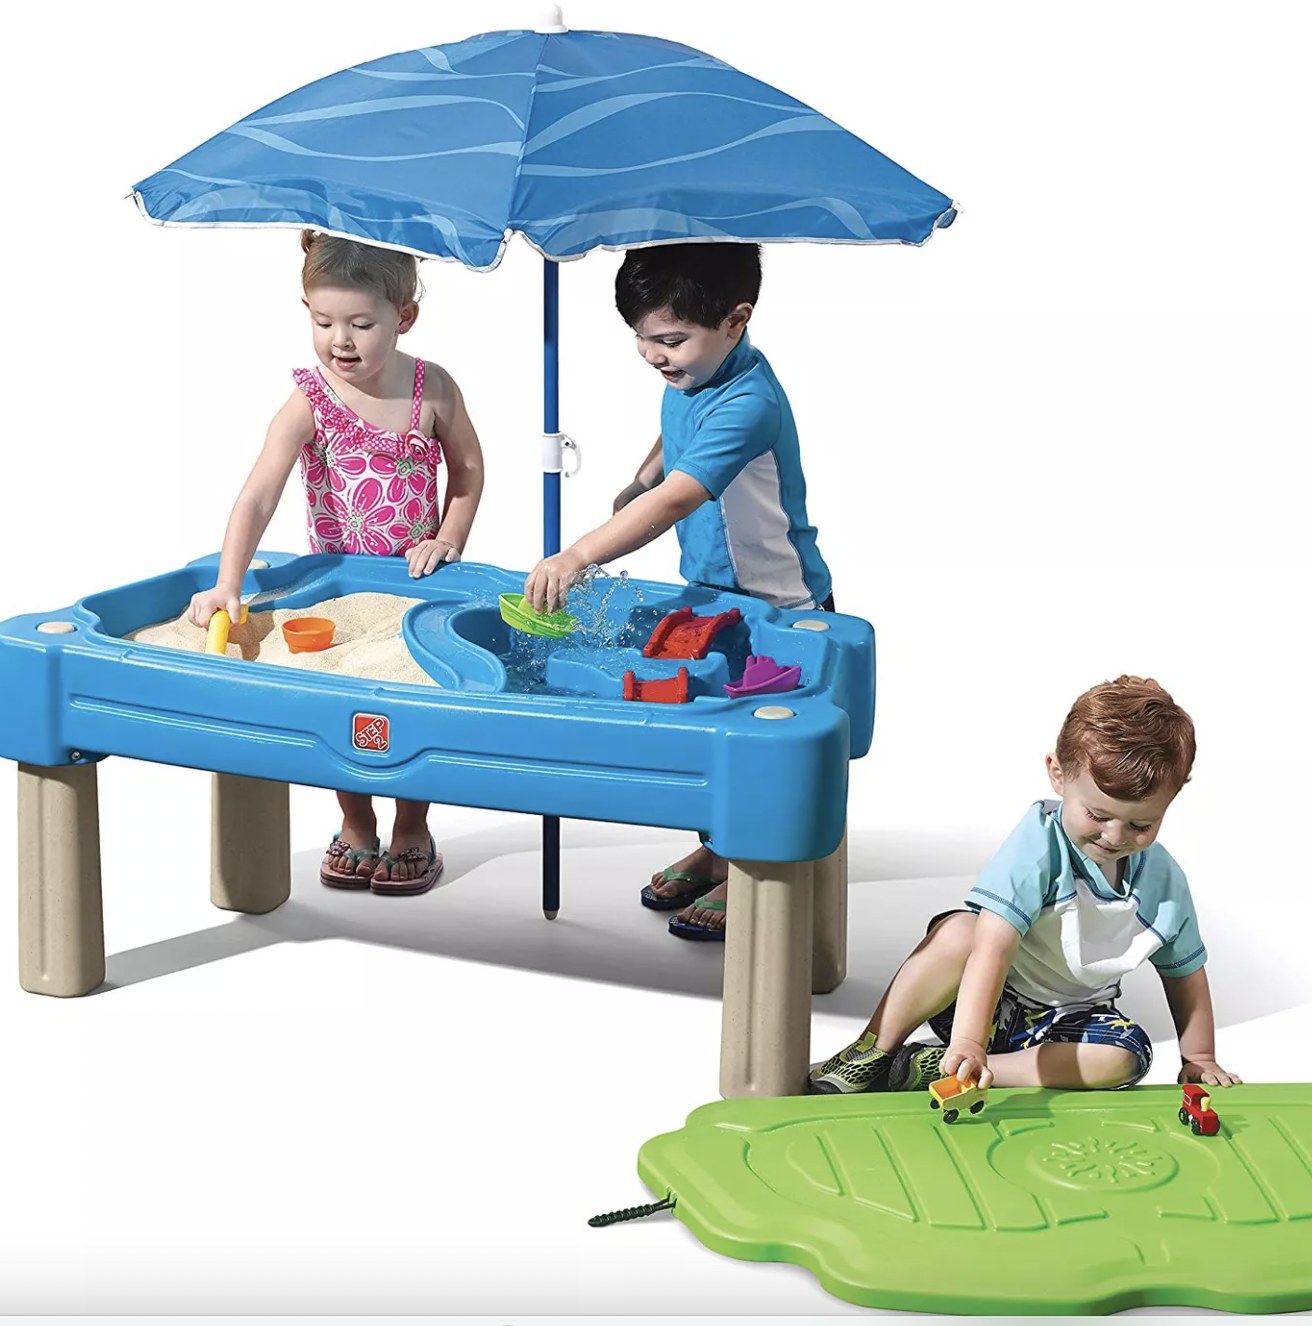 Kids using outdoor activity table